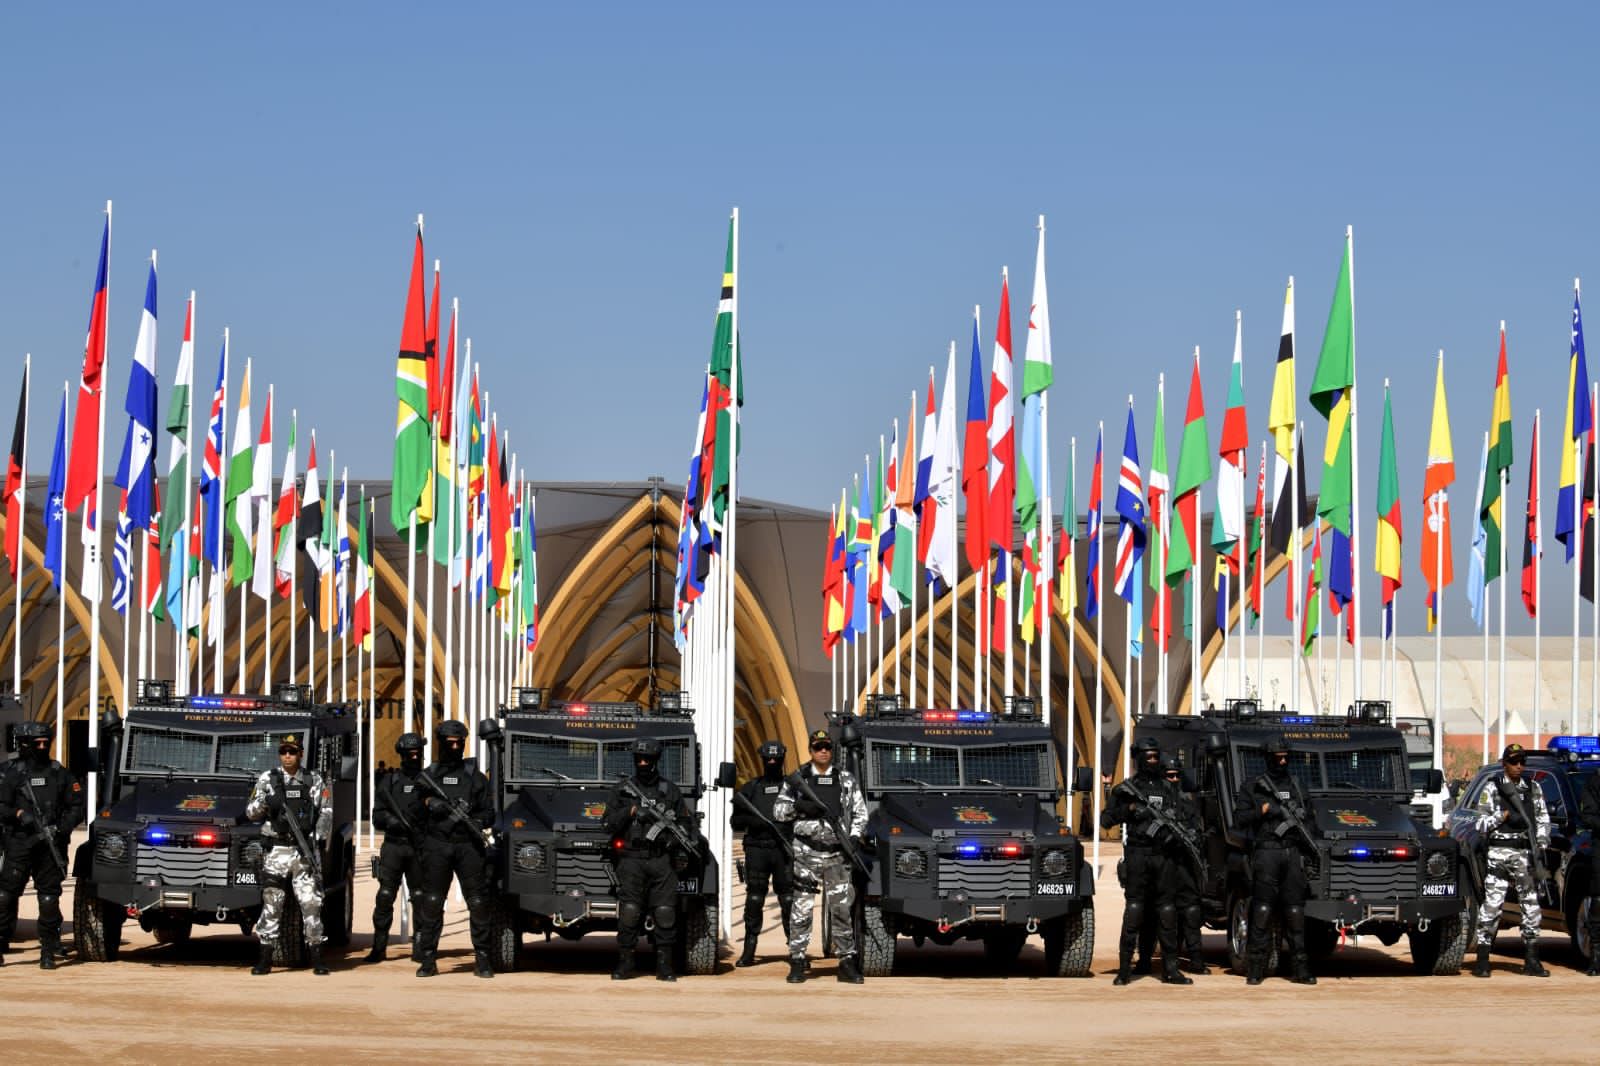 Security arrangements accompanying the World Bank meetings in Marrakesh